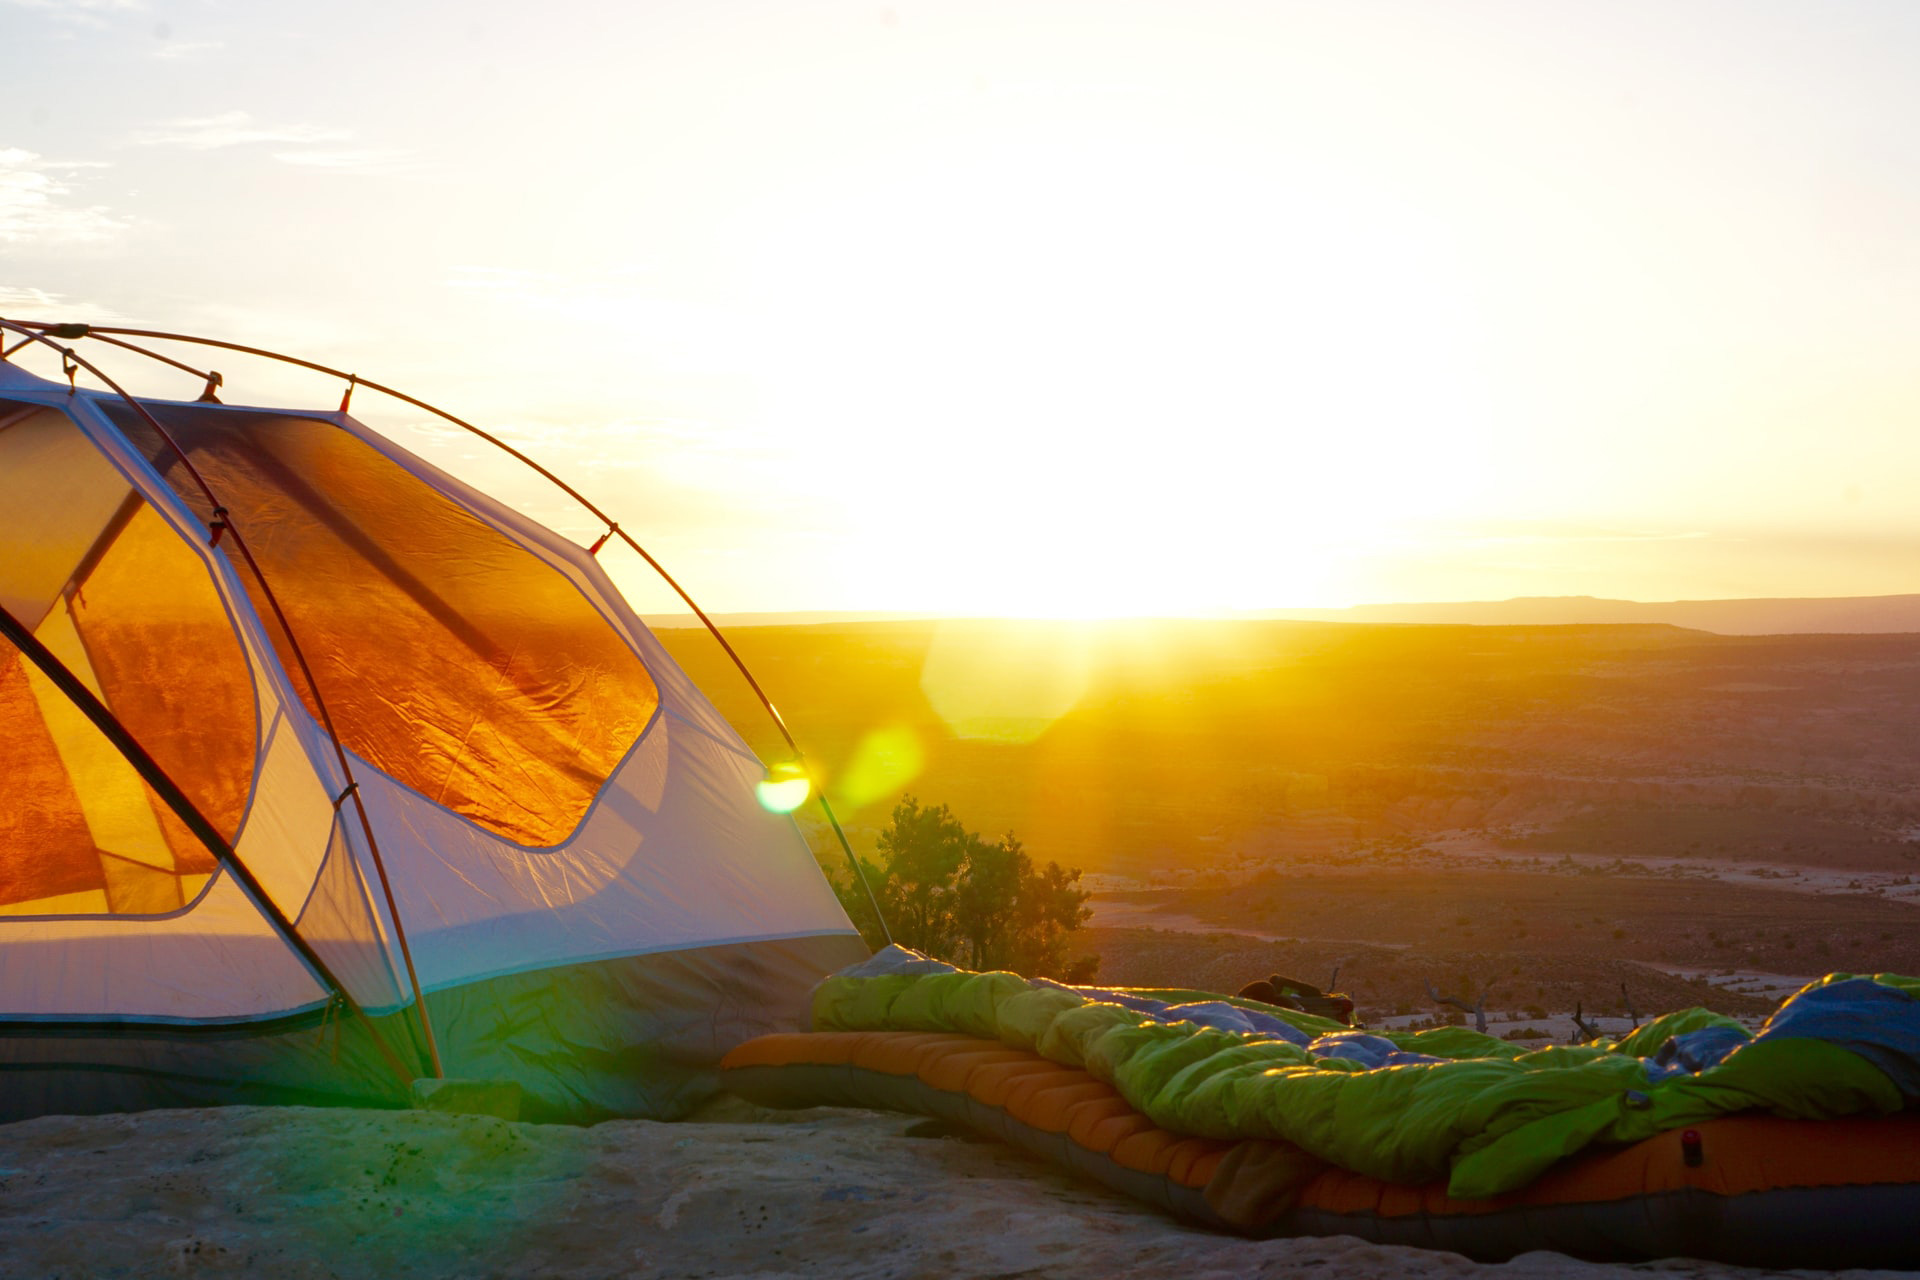  7 Best Backpacking Tents Under 100 in 2022